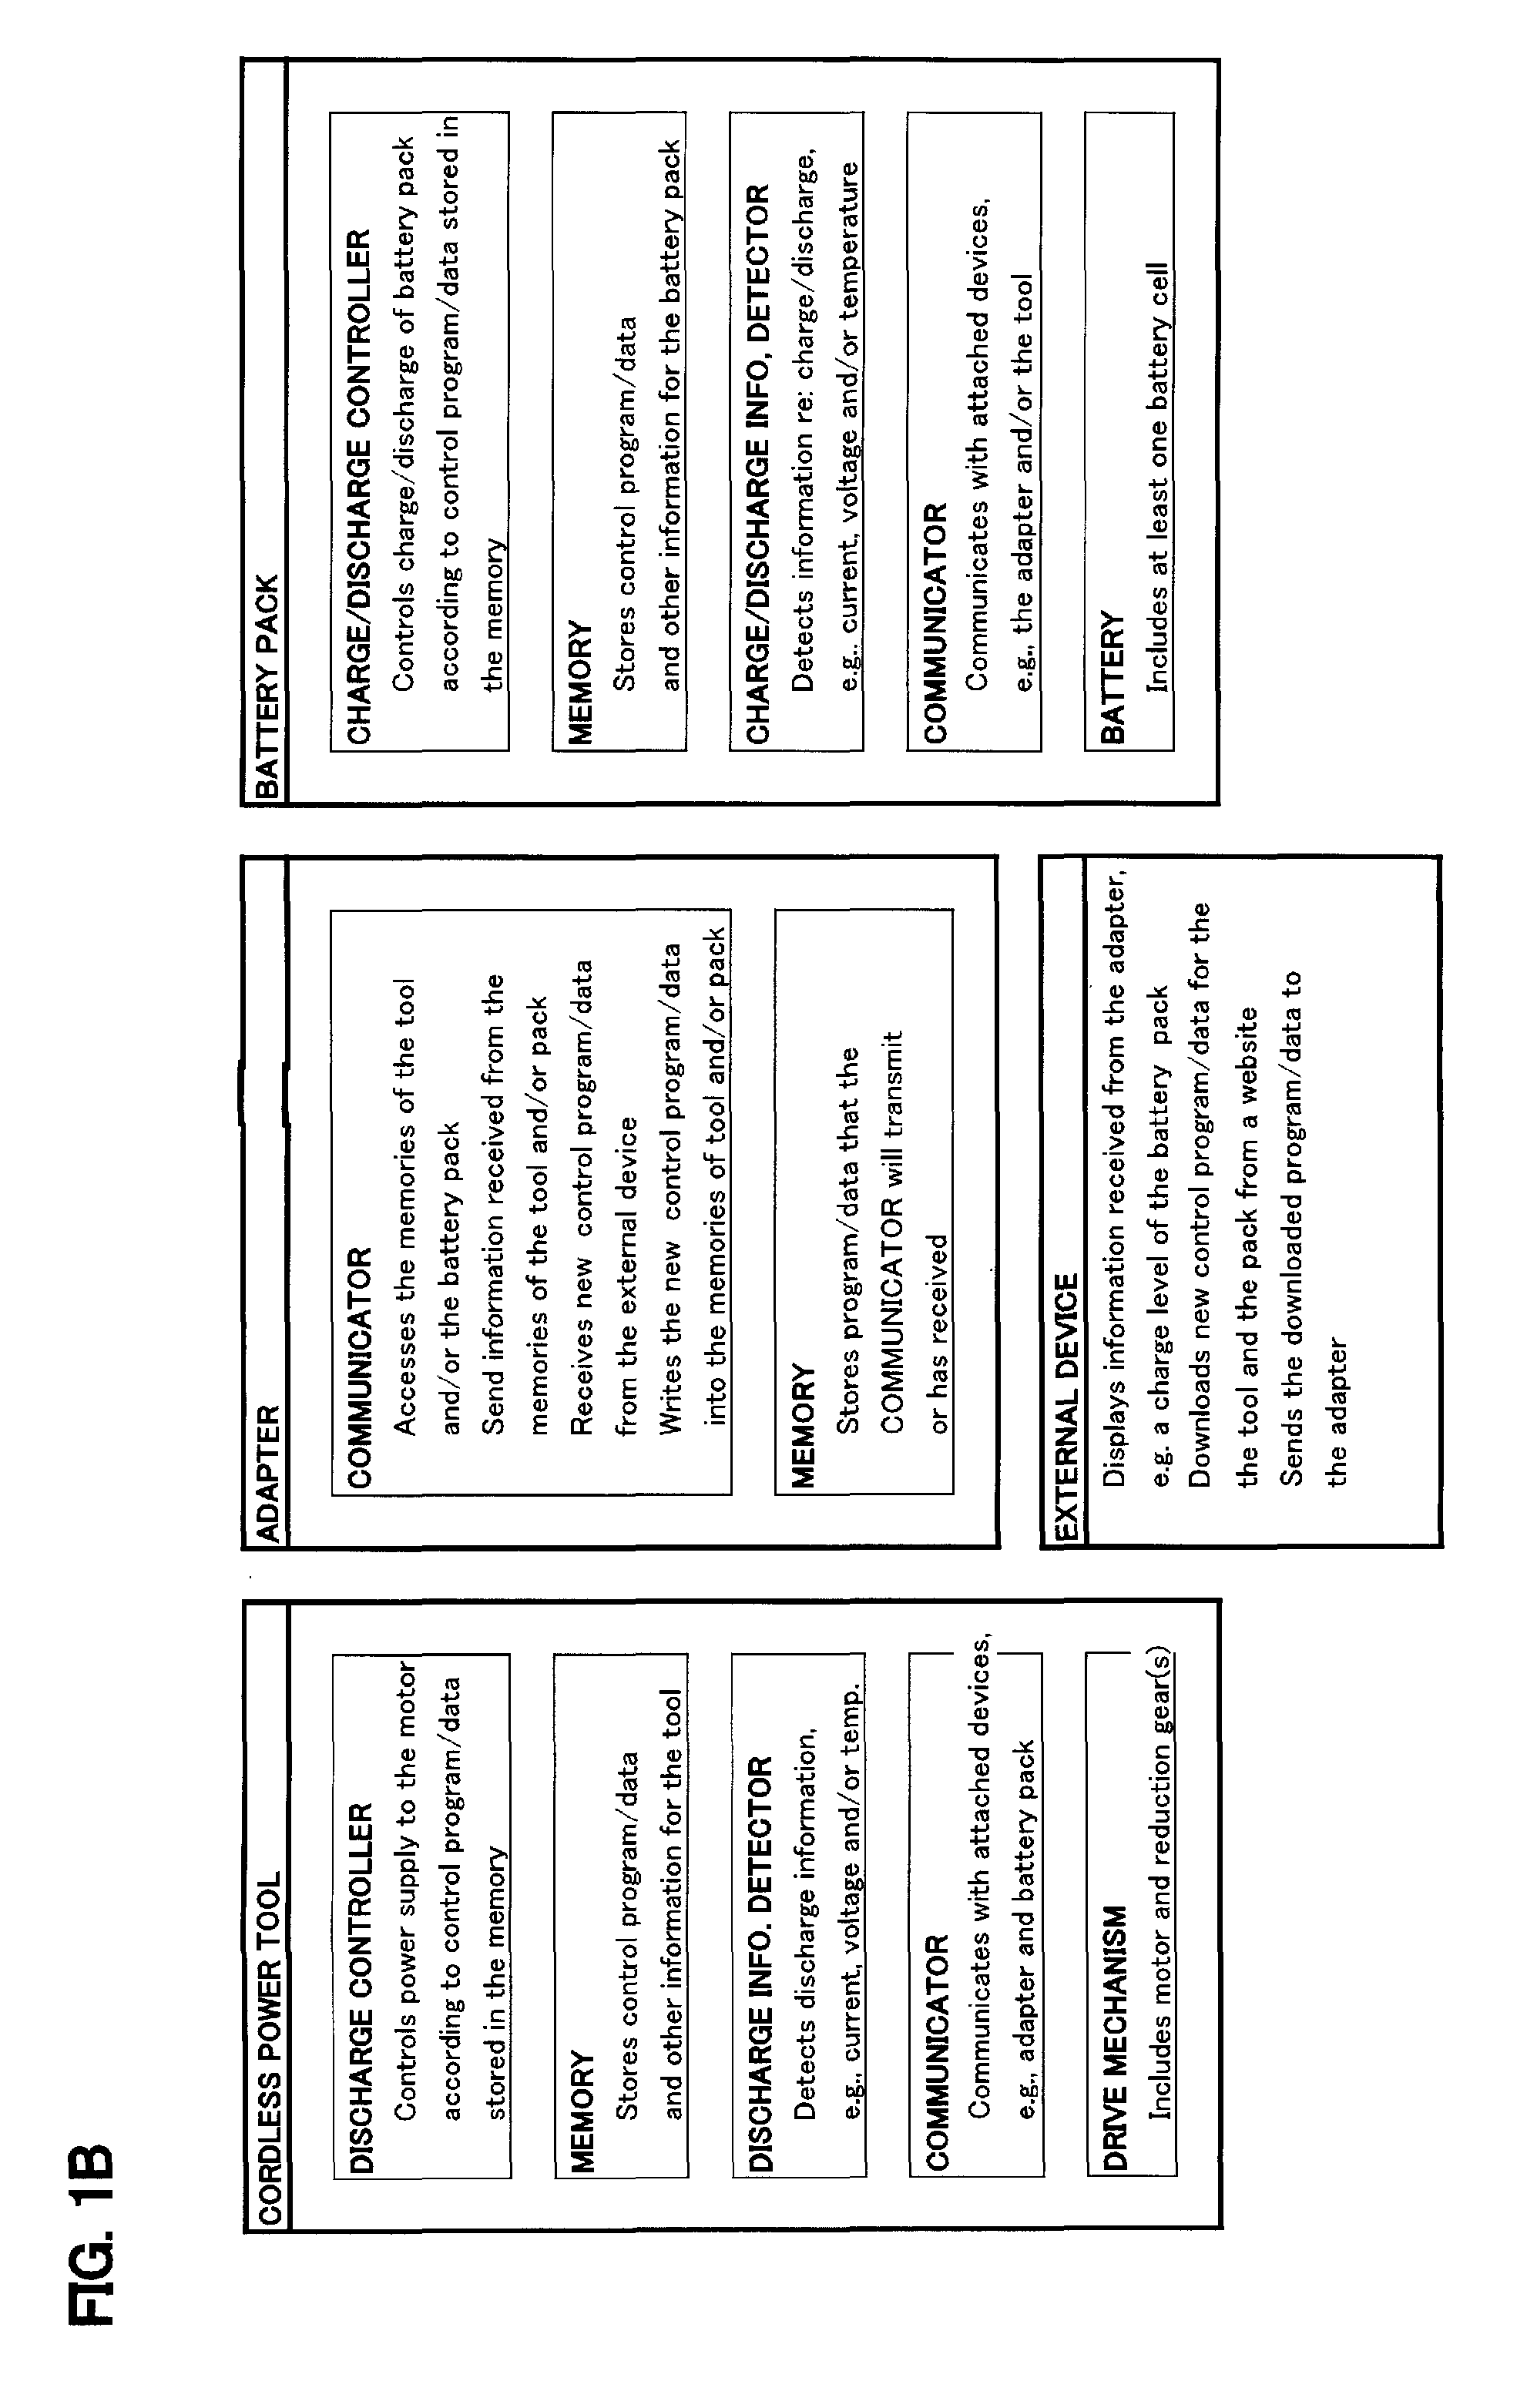 Adapter for power tools, power tool system and method for wirelessly communicating maintenance information therefor